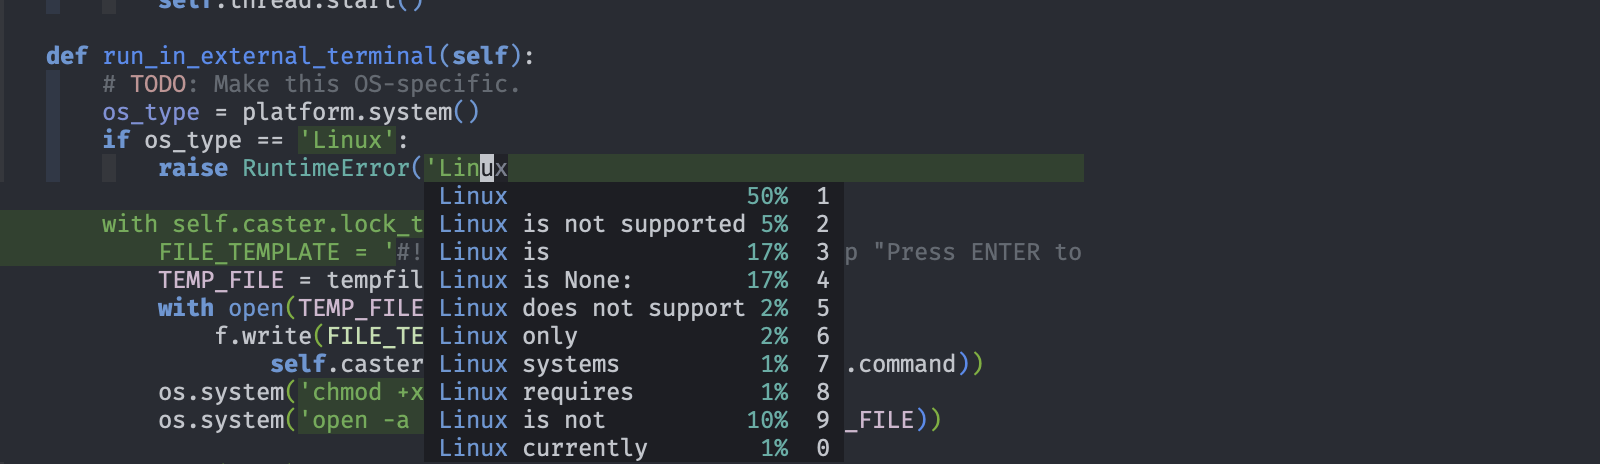 emacs_packages2-1.png